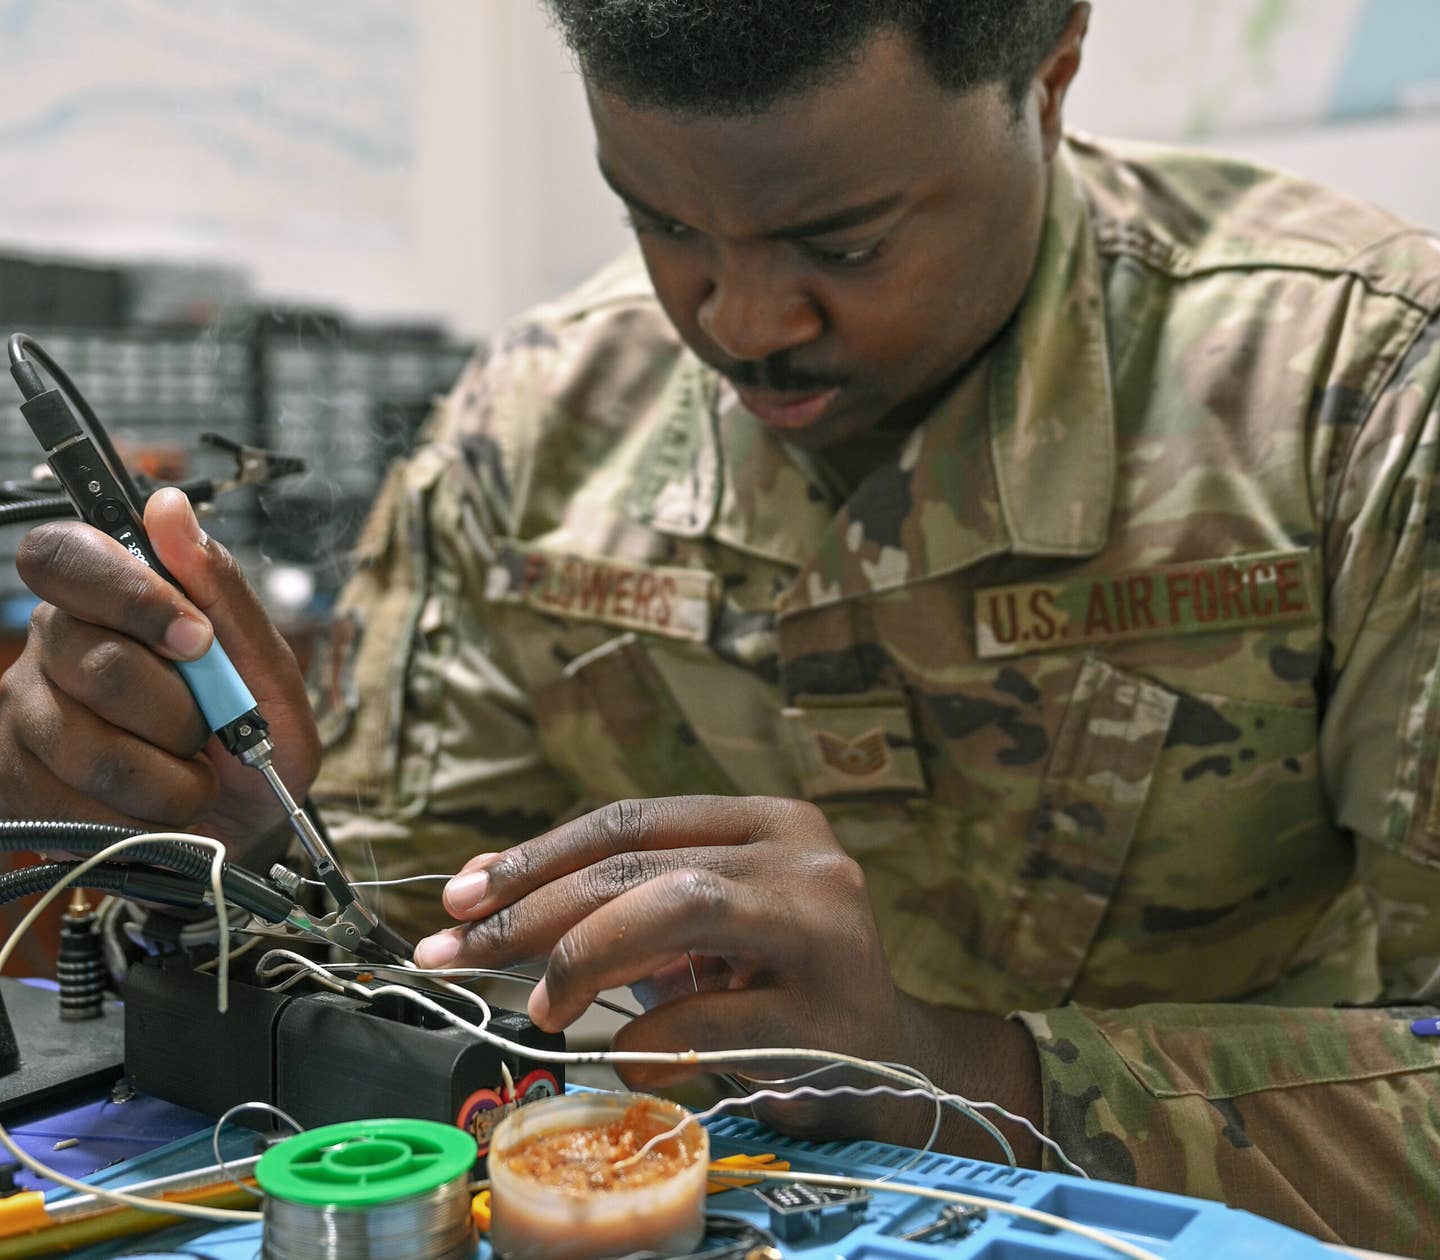 U.S. Air Force Tech. Sgt. Malik Flowers, an installation spectrum manager with Task Force 99, solders components at the TF-99 lab at Al Udeid Air Base, Qatar, November 18, 2022. <em>Credit: U.S. Air Force Photo by Senior Airman Micah Coate</em>